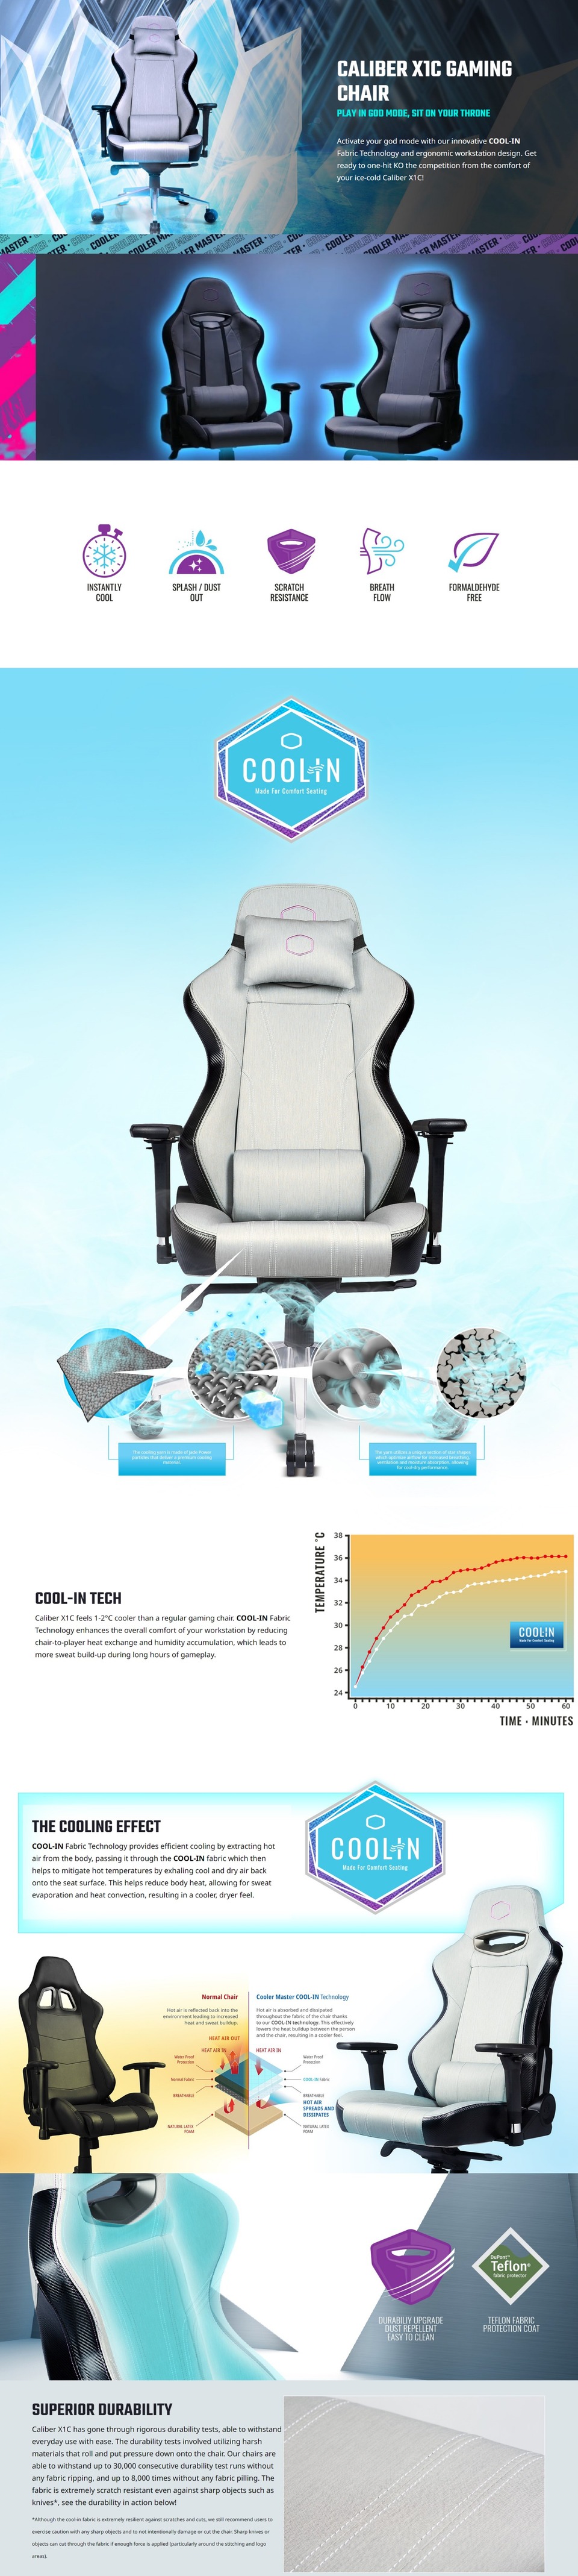 coolermaster cmi-gcx1c-gy caliber x1 gaming chair cool-in edition